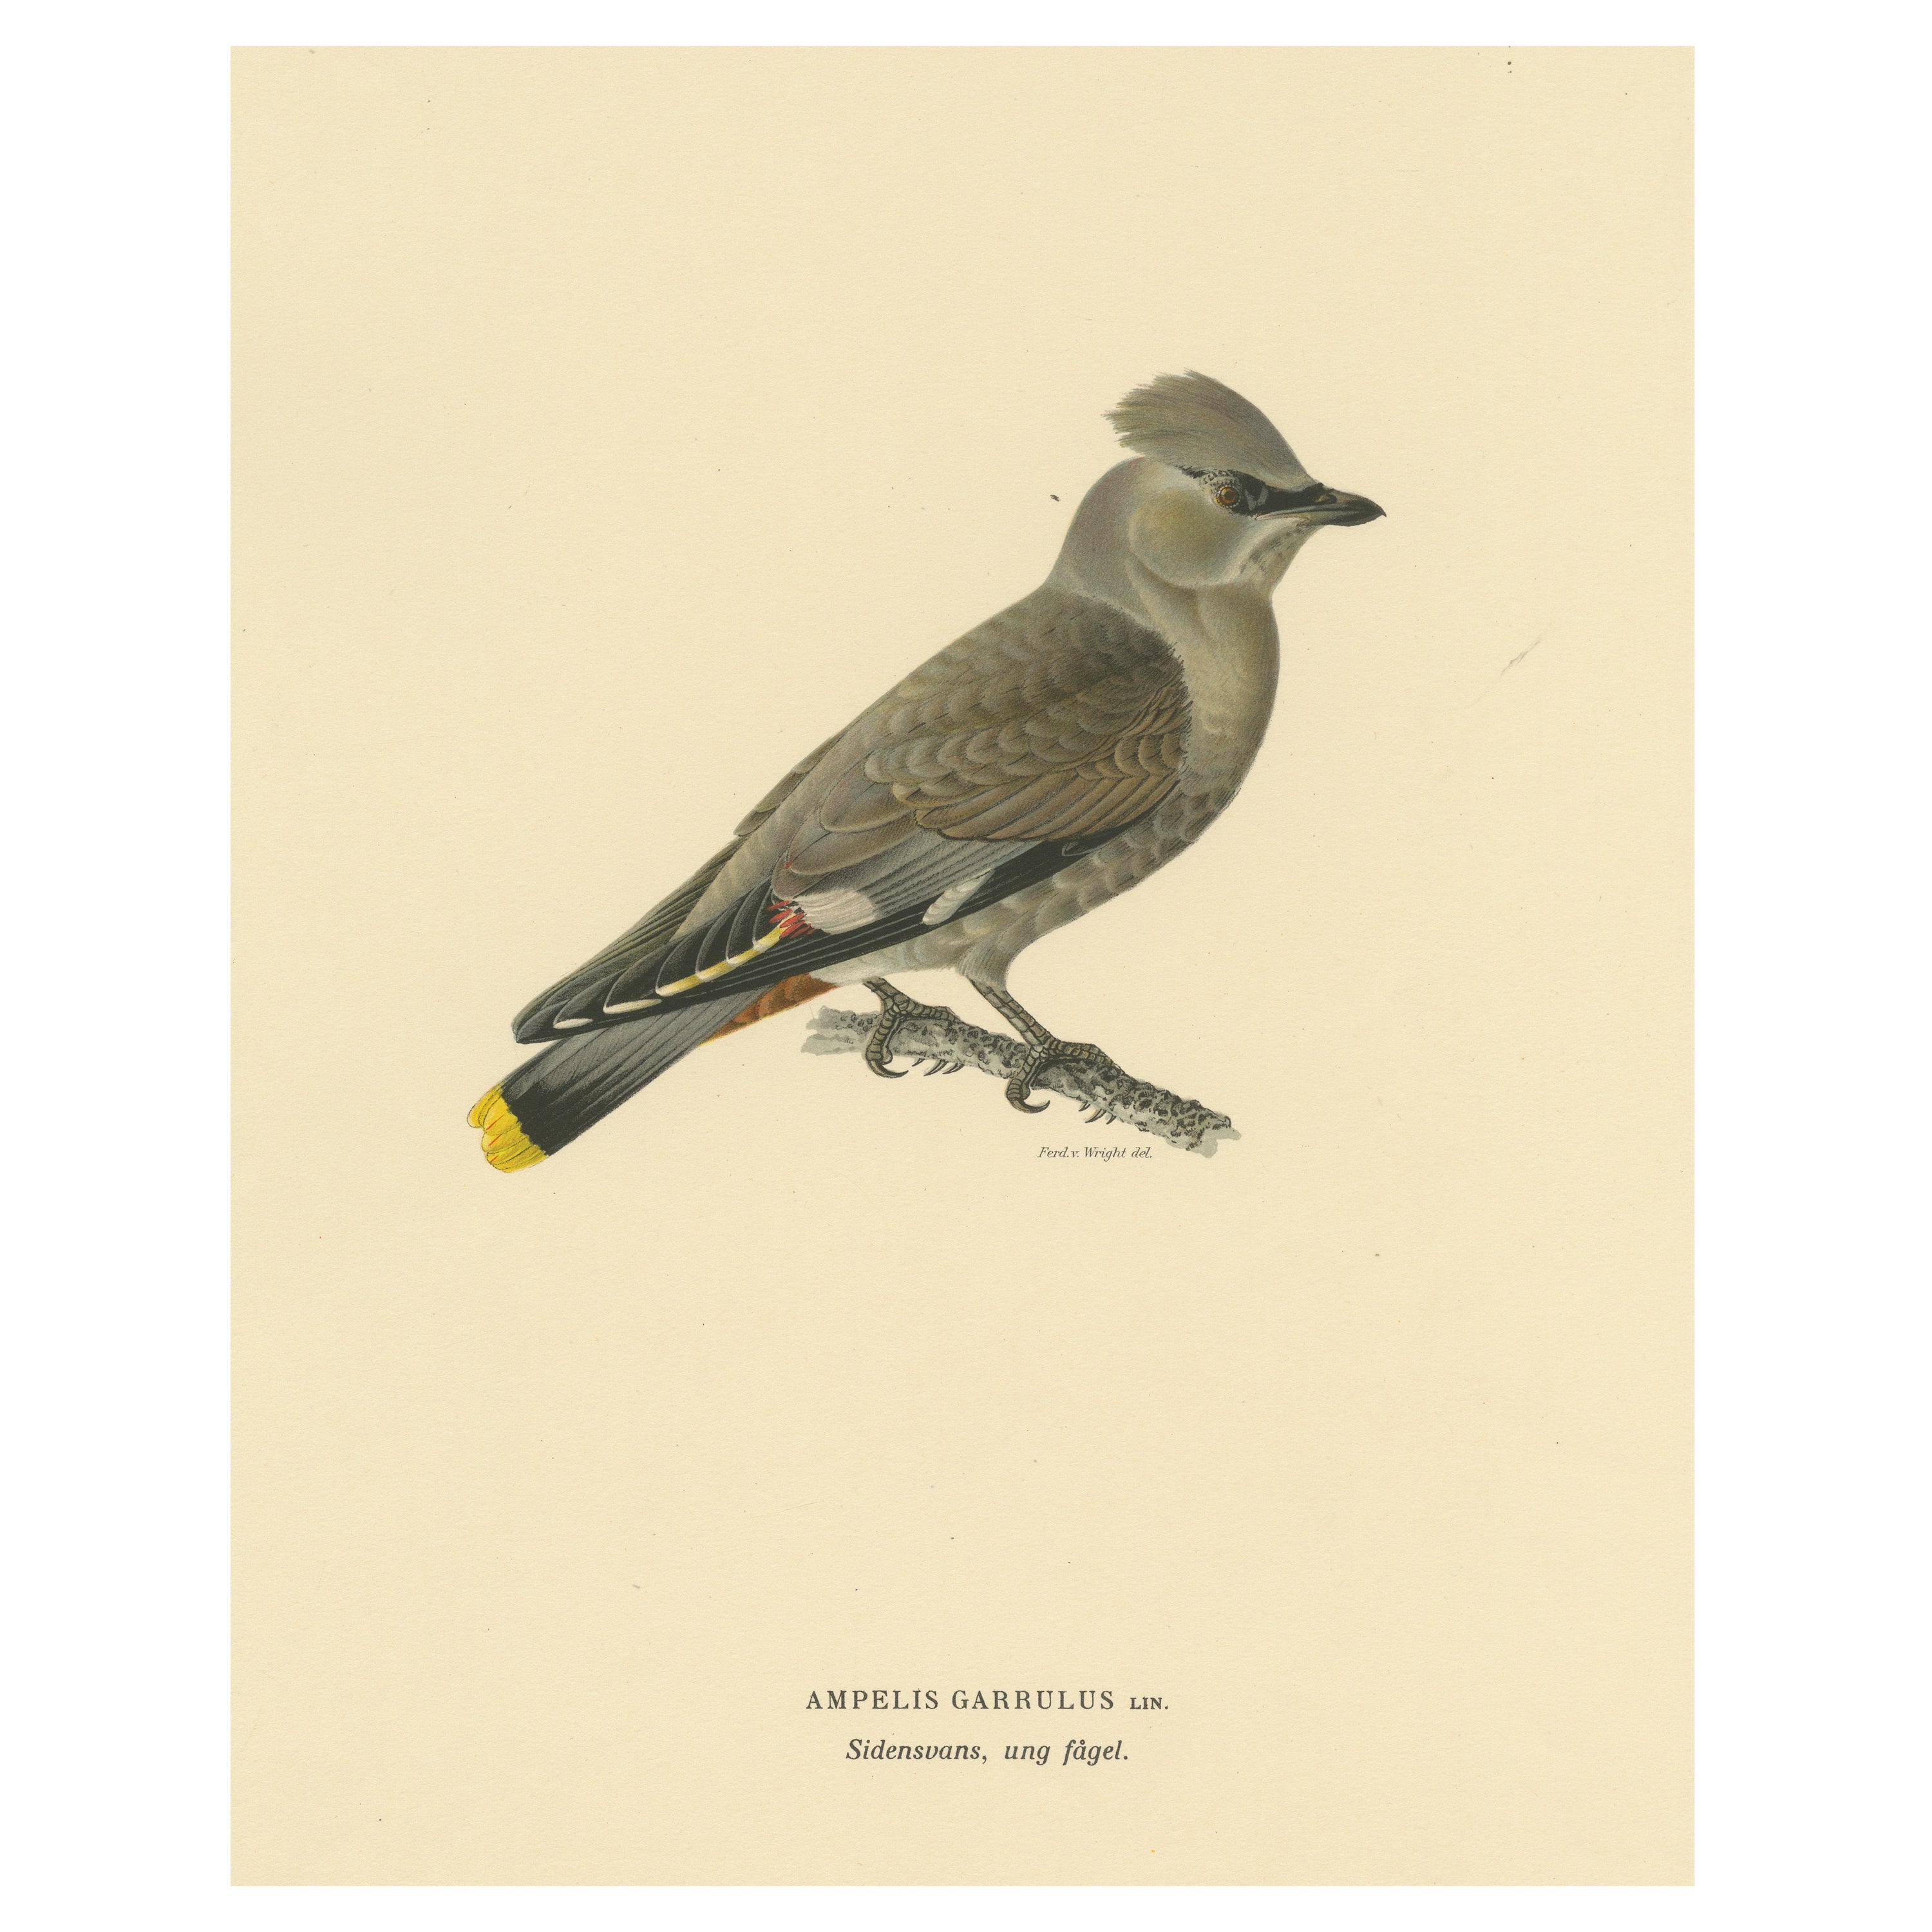 Graceful Nomad: A Portrait of the Juvenile Bohemian Waxwing by Magnus von Wright For Sale